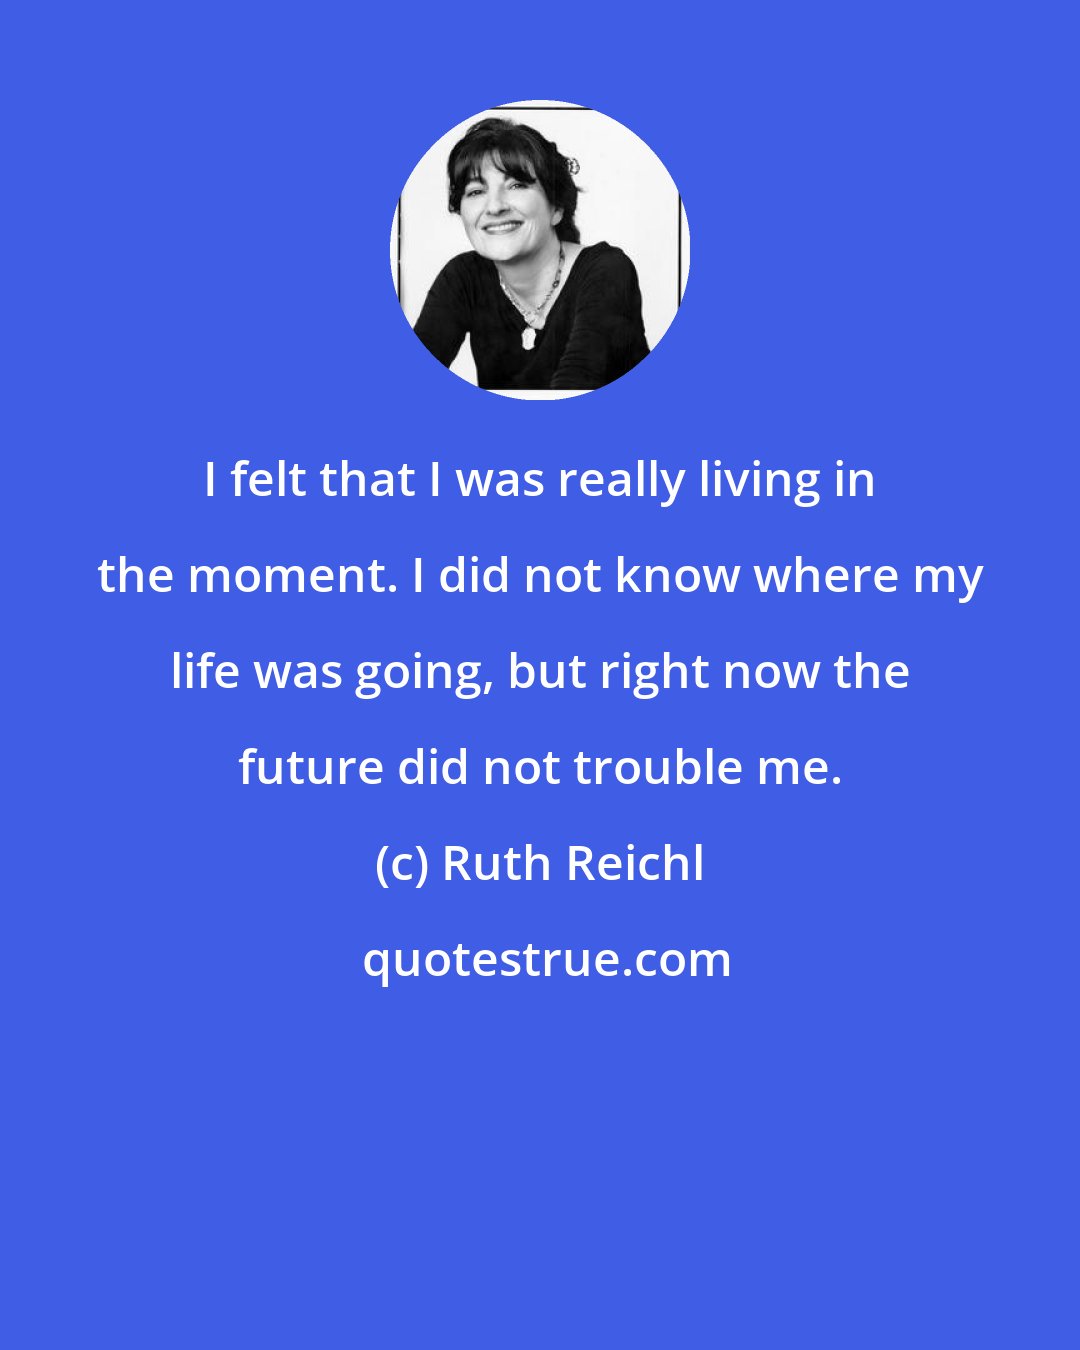 Ruth Reichl: I felt that I was really living in the moment. I did not know where my life was going, but right now the future did not trouble me.